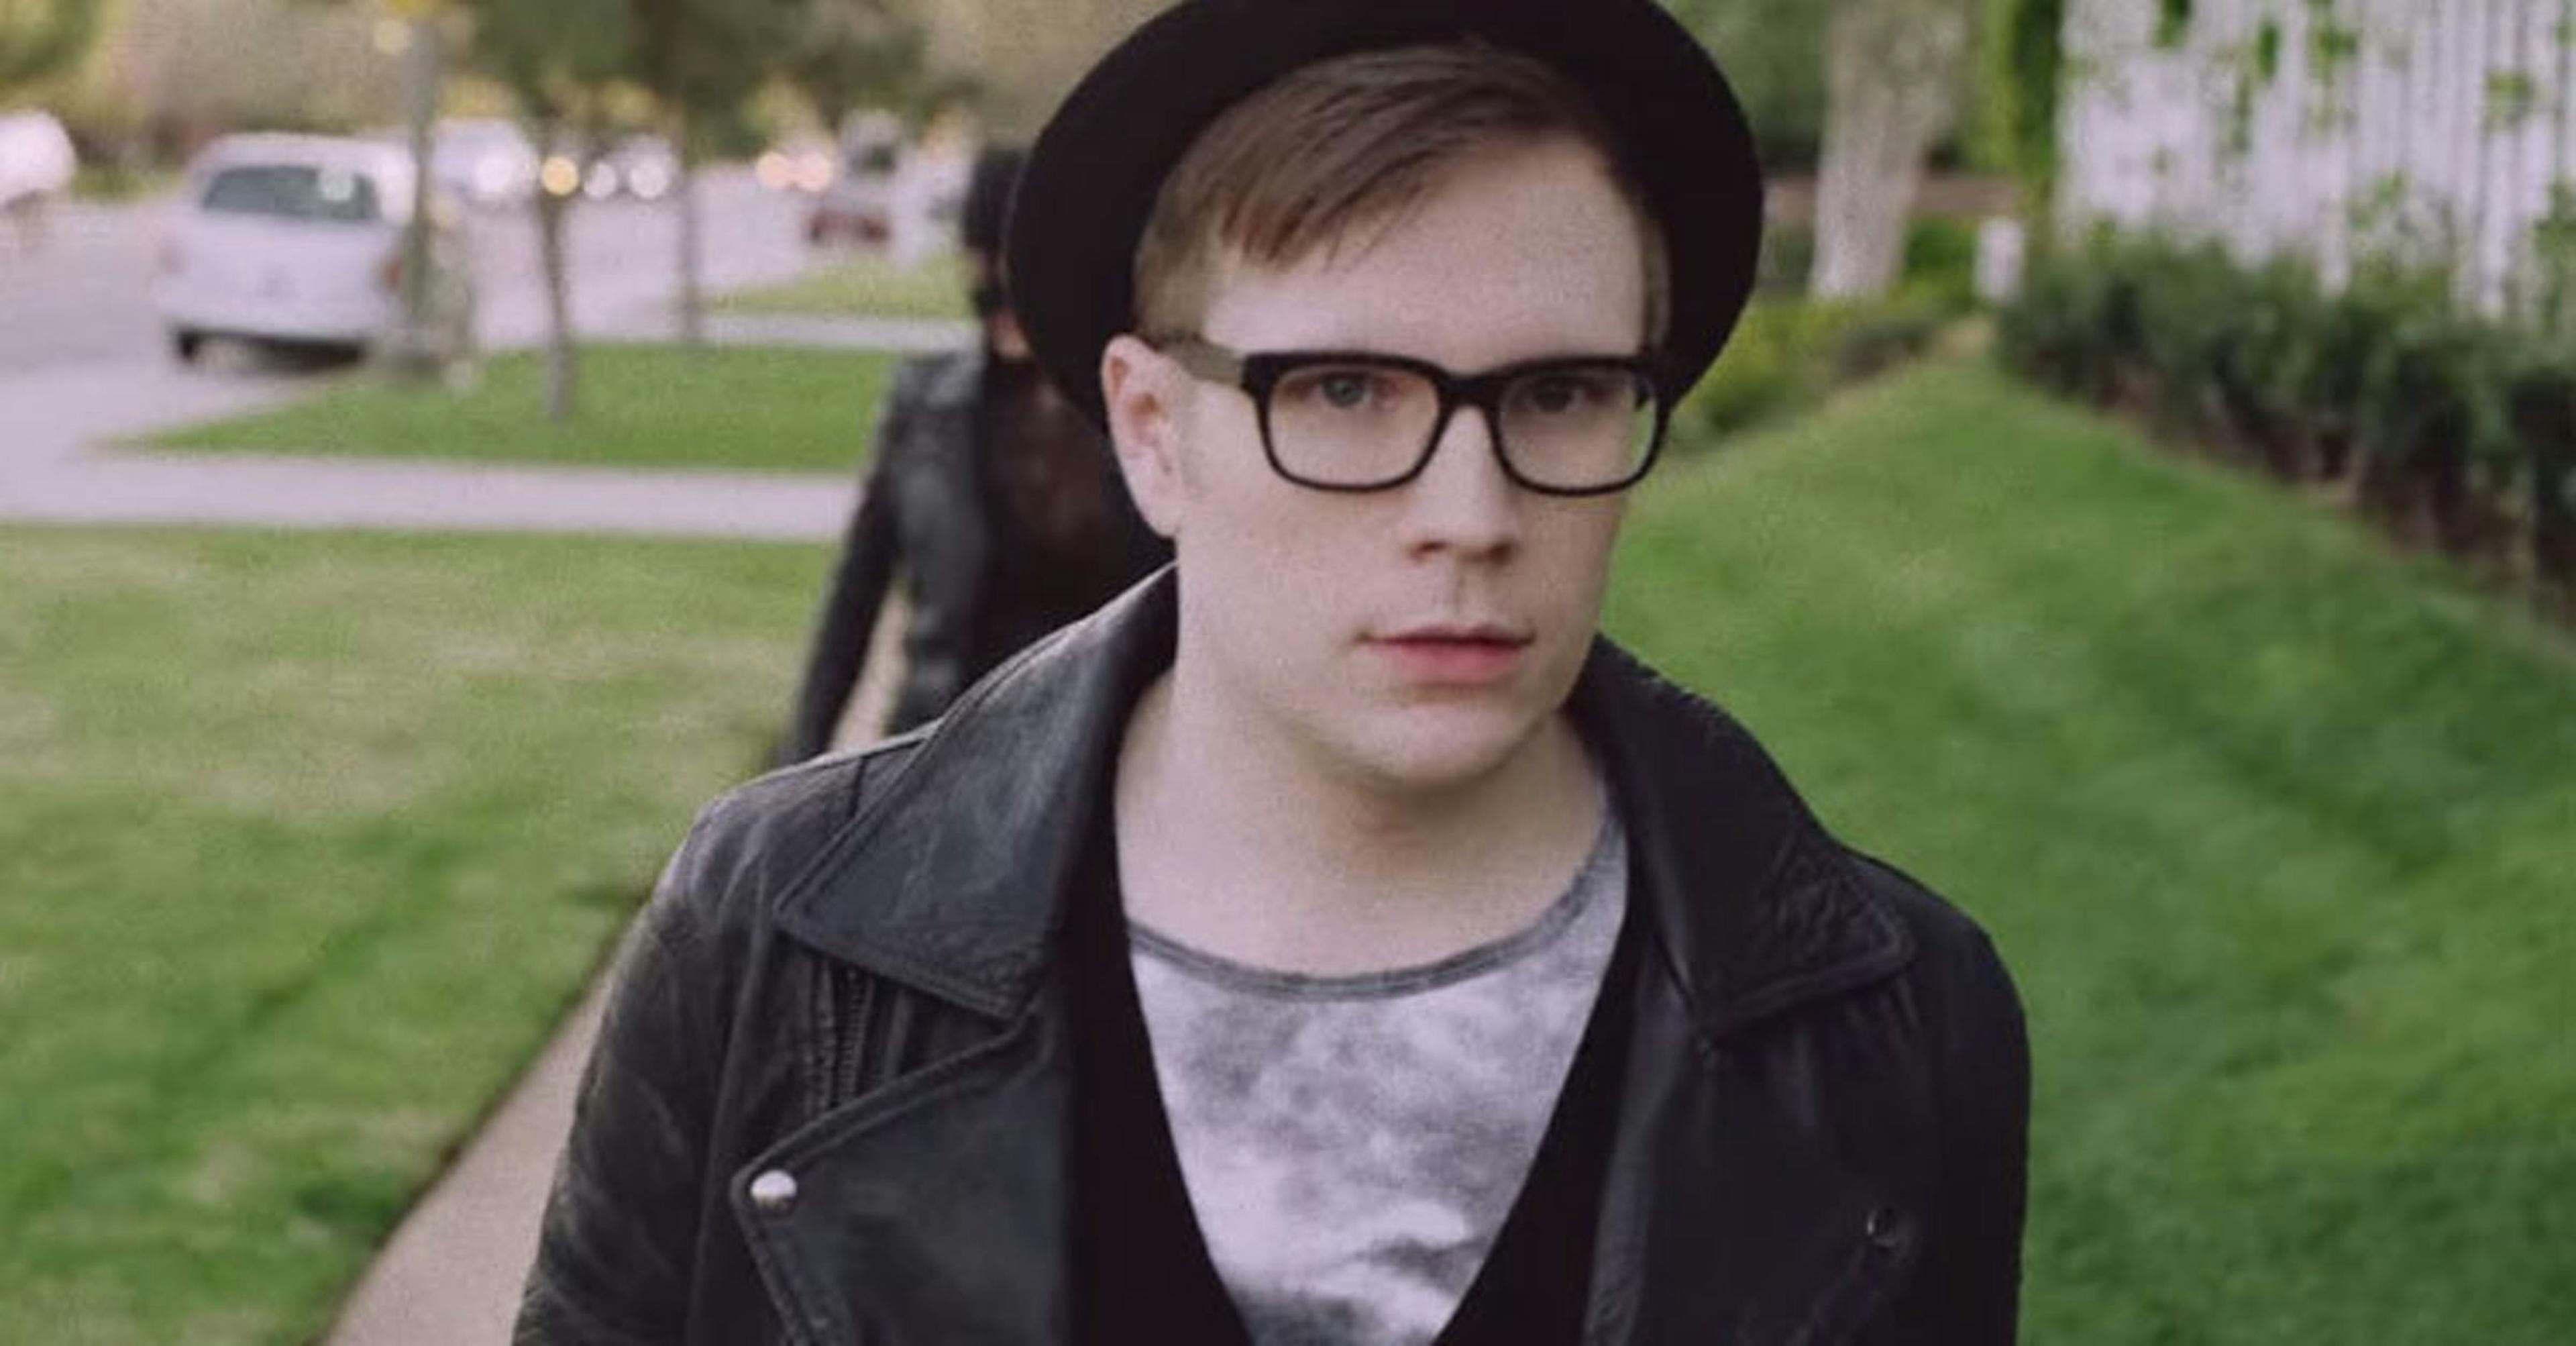 Patrick Stump Teams Up With Chicago Singer-Songwriter On Chance The Rapper Cover